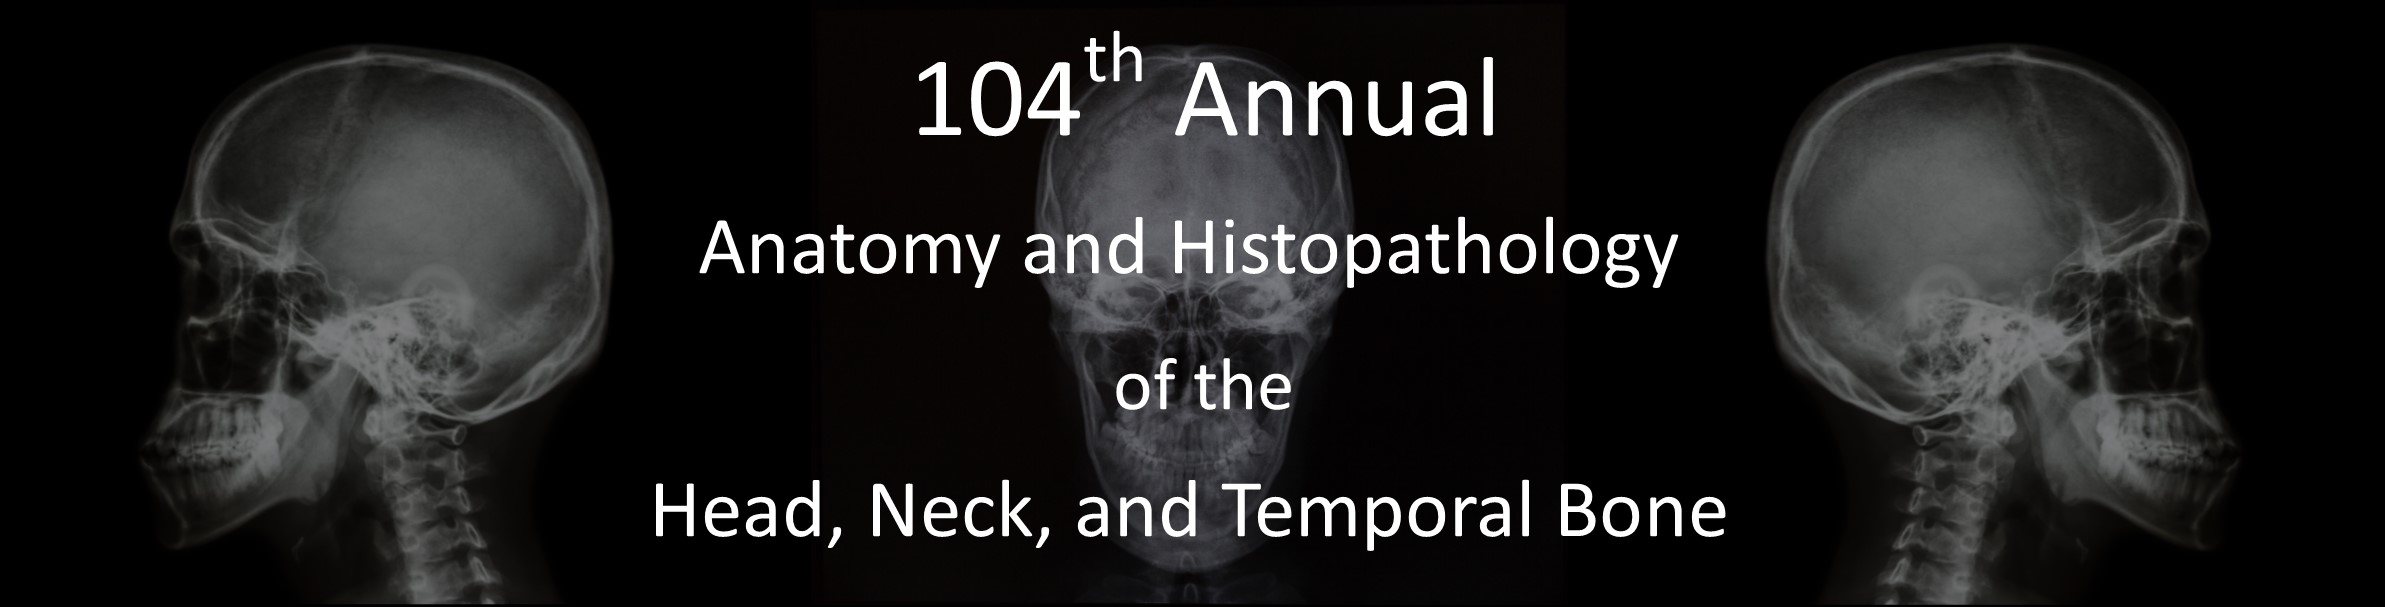 104th Annual Course on Anatomy & Histopathology of the Head, Neck & Temporal Bone Banner